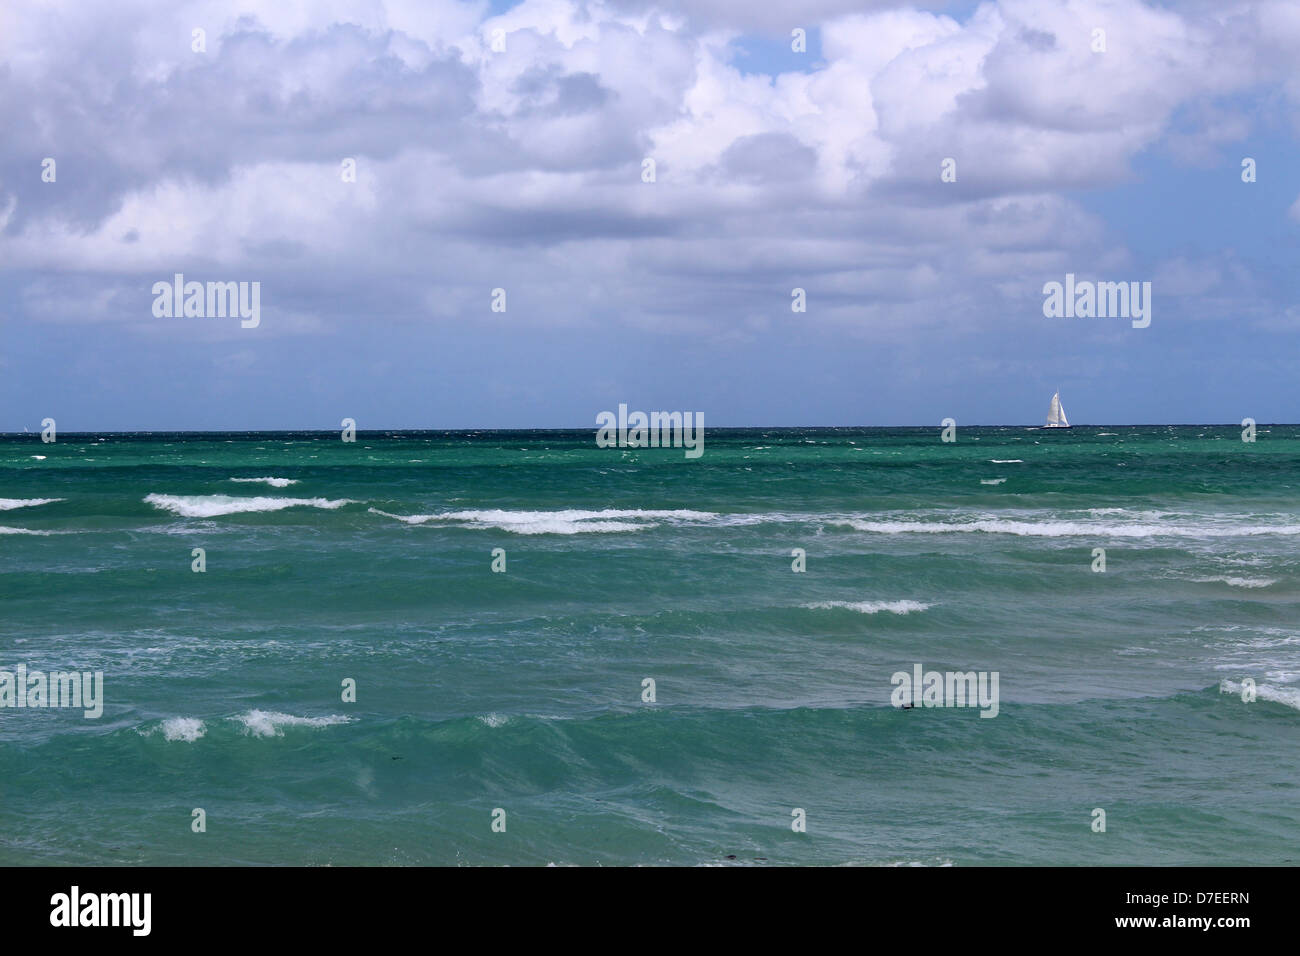 Lone sailboat with full sails on the horizon of the ocean with choppy waves making their way to the shore and expressive skies. Stock Photo